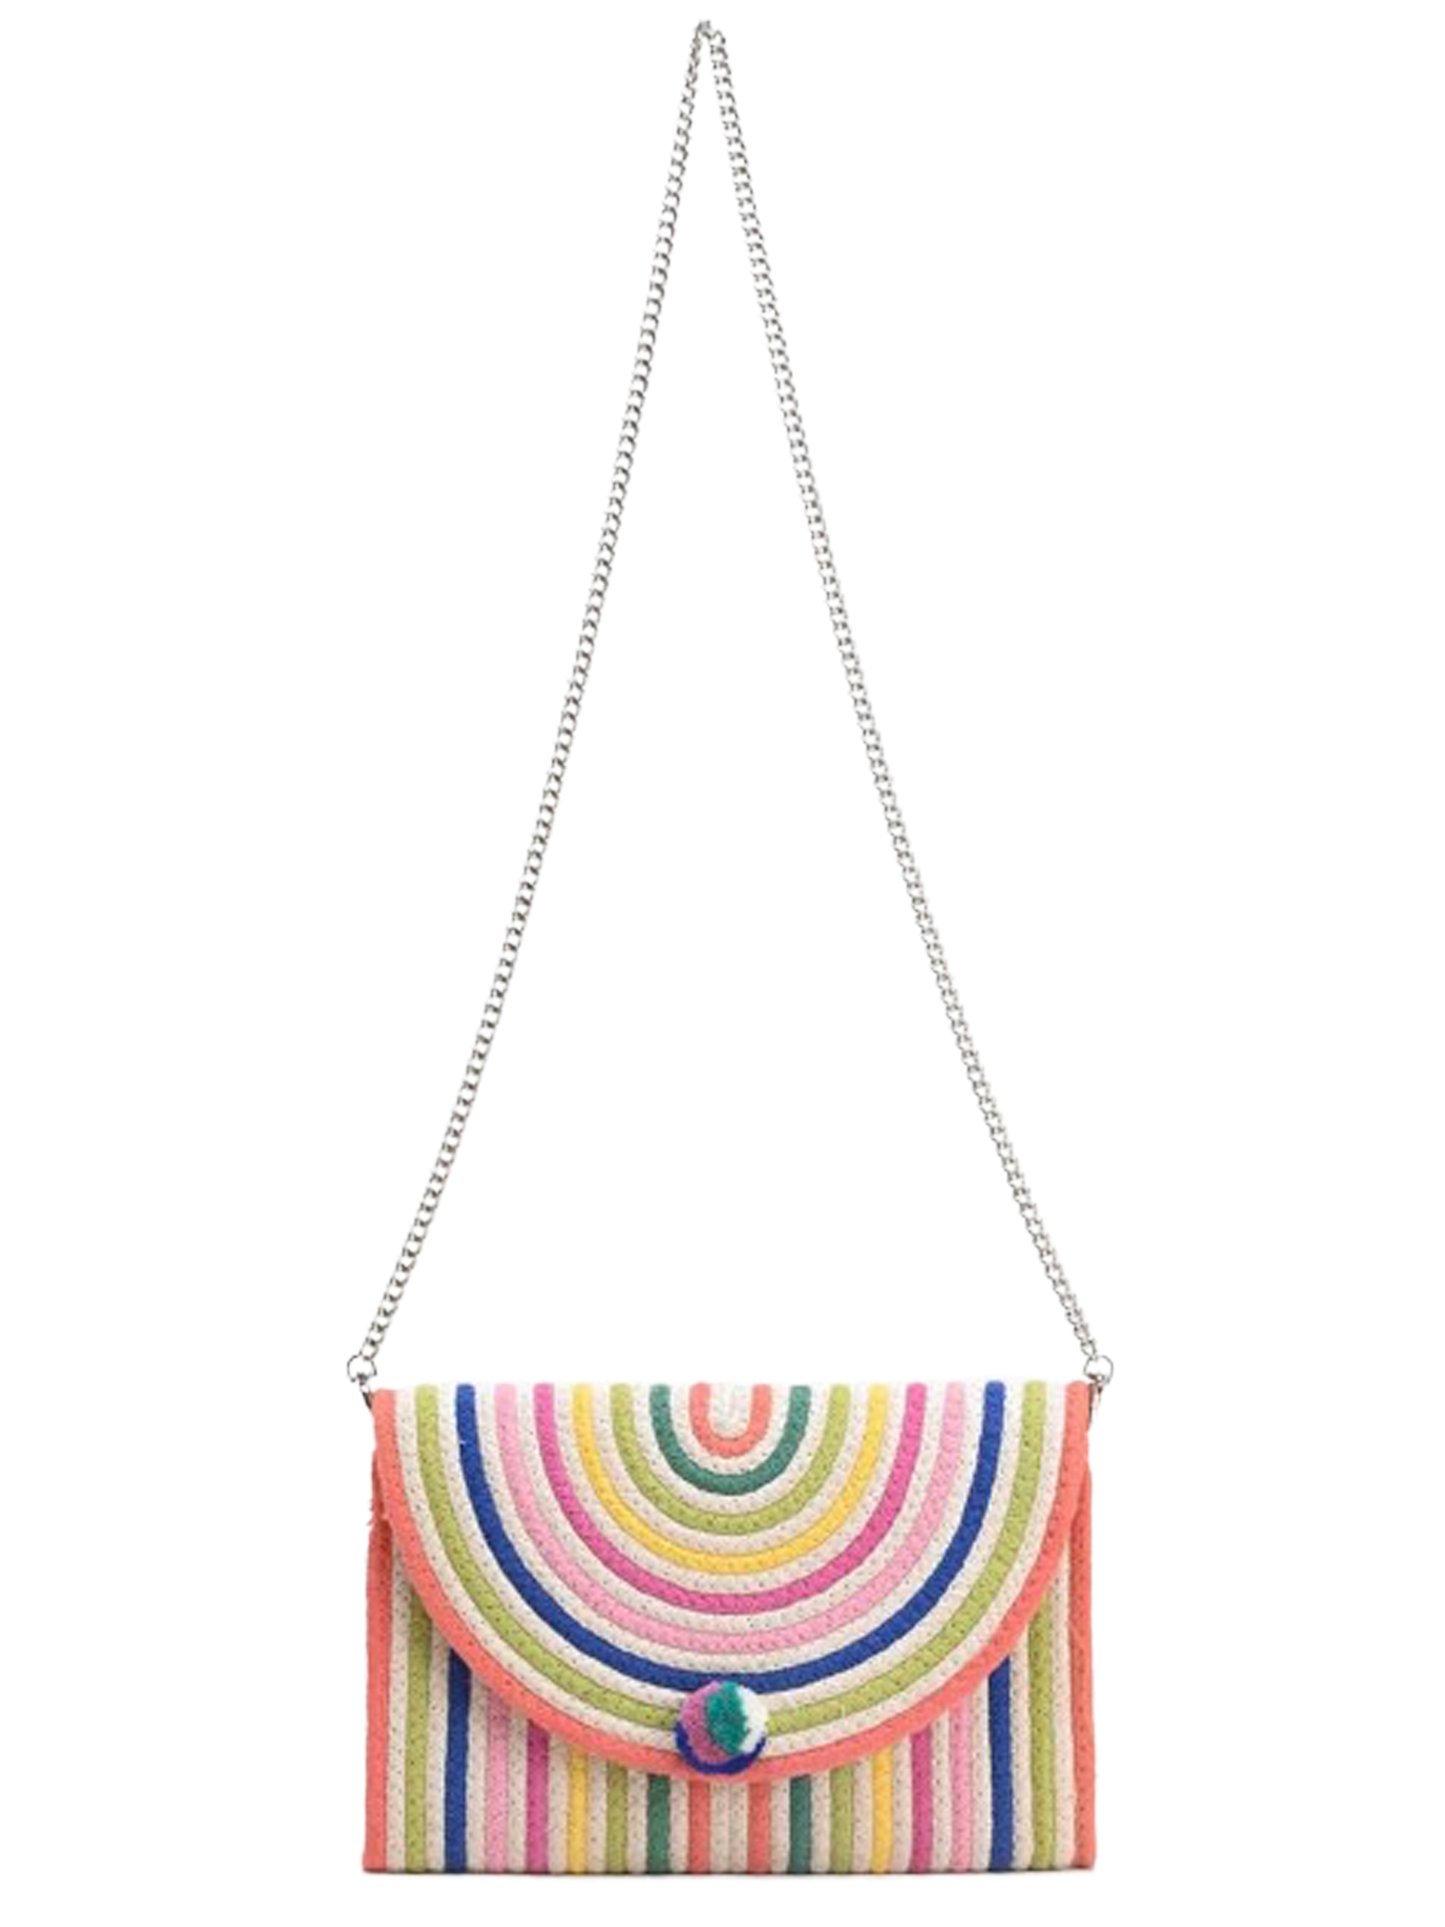 The Rainbow Embellished Purse front with chain